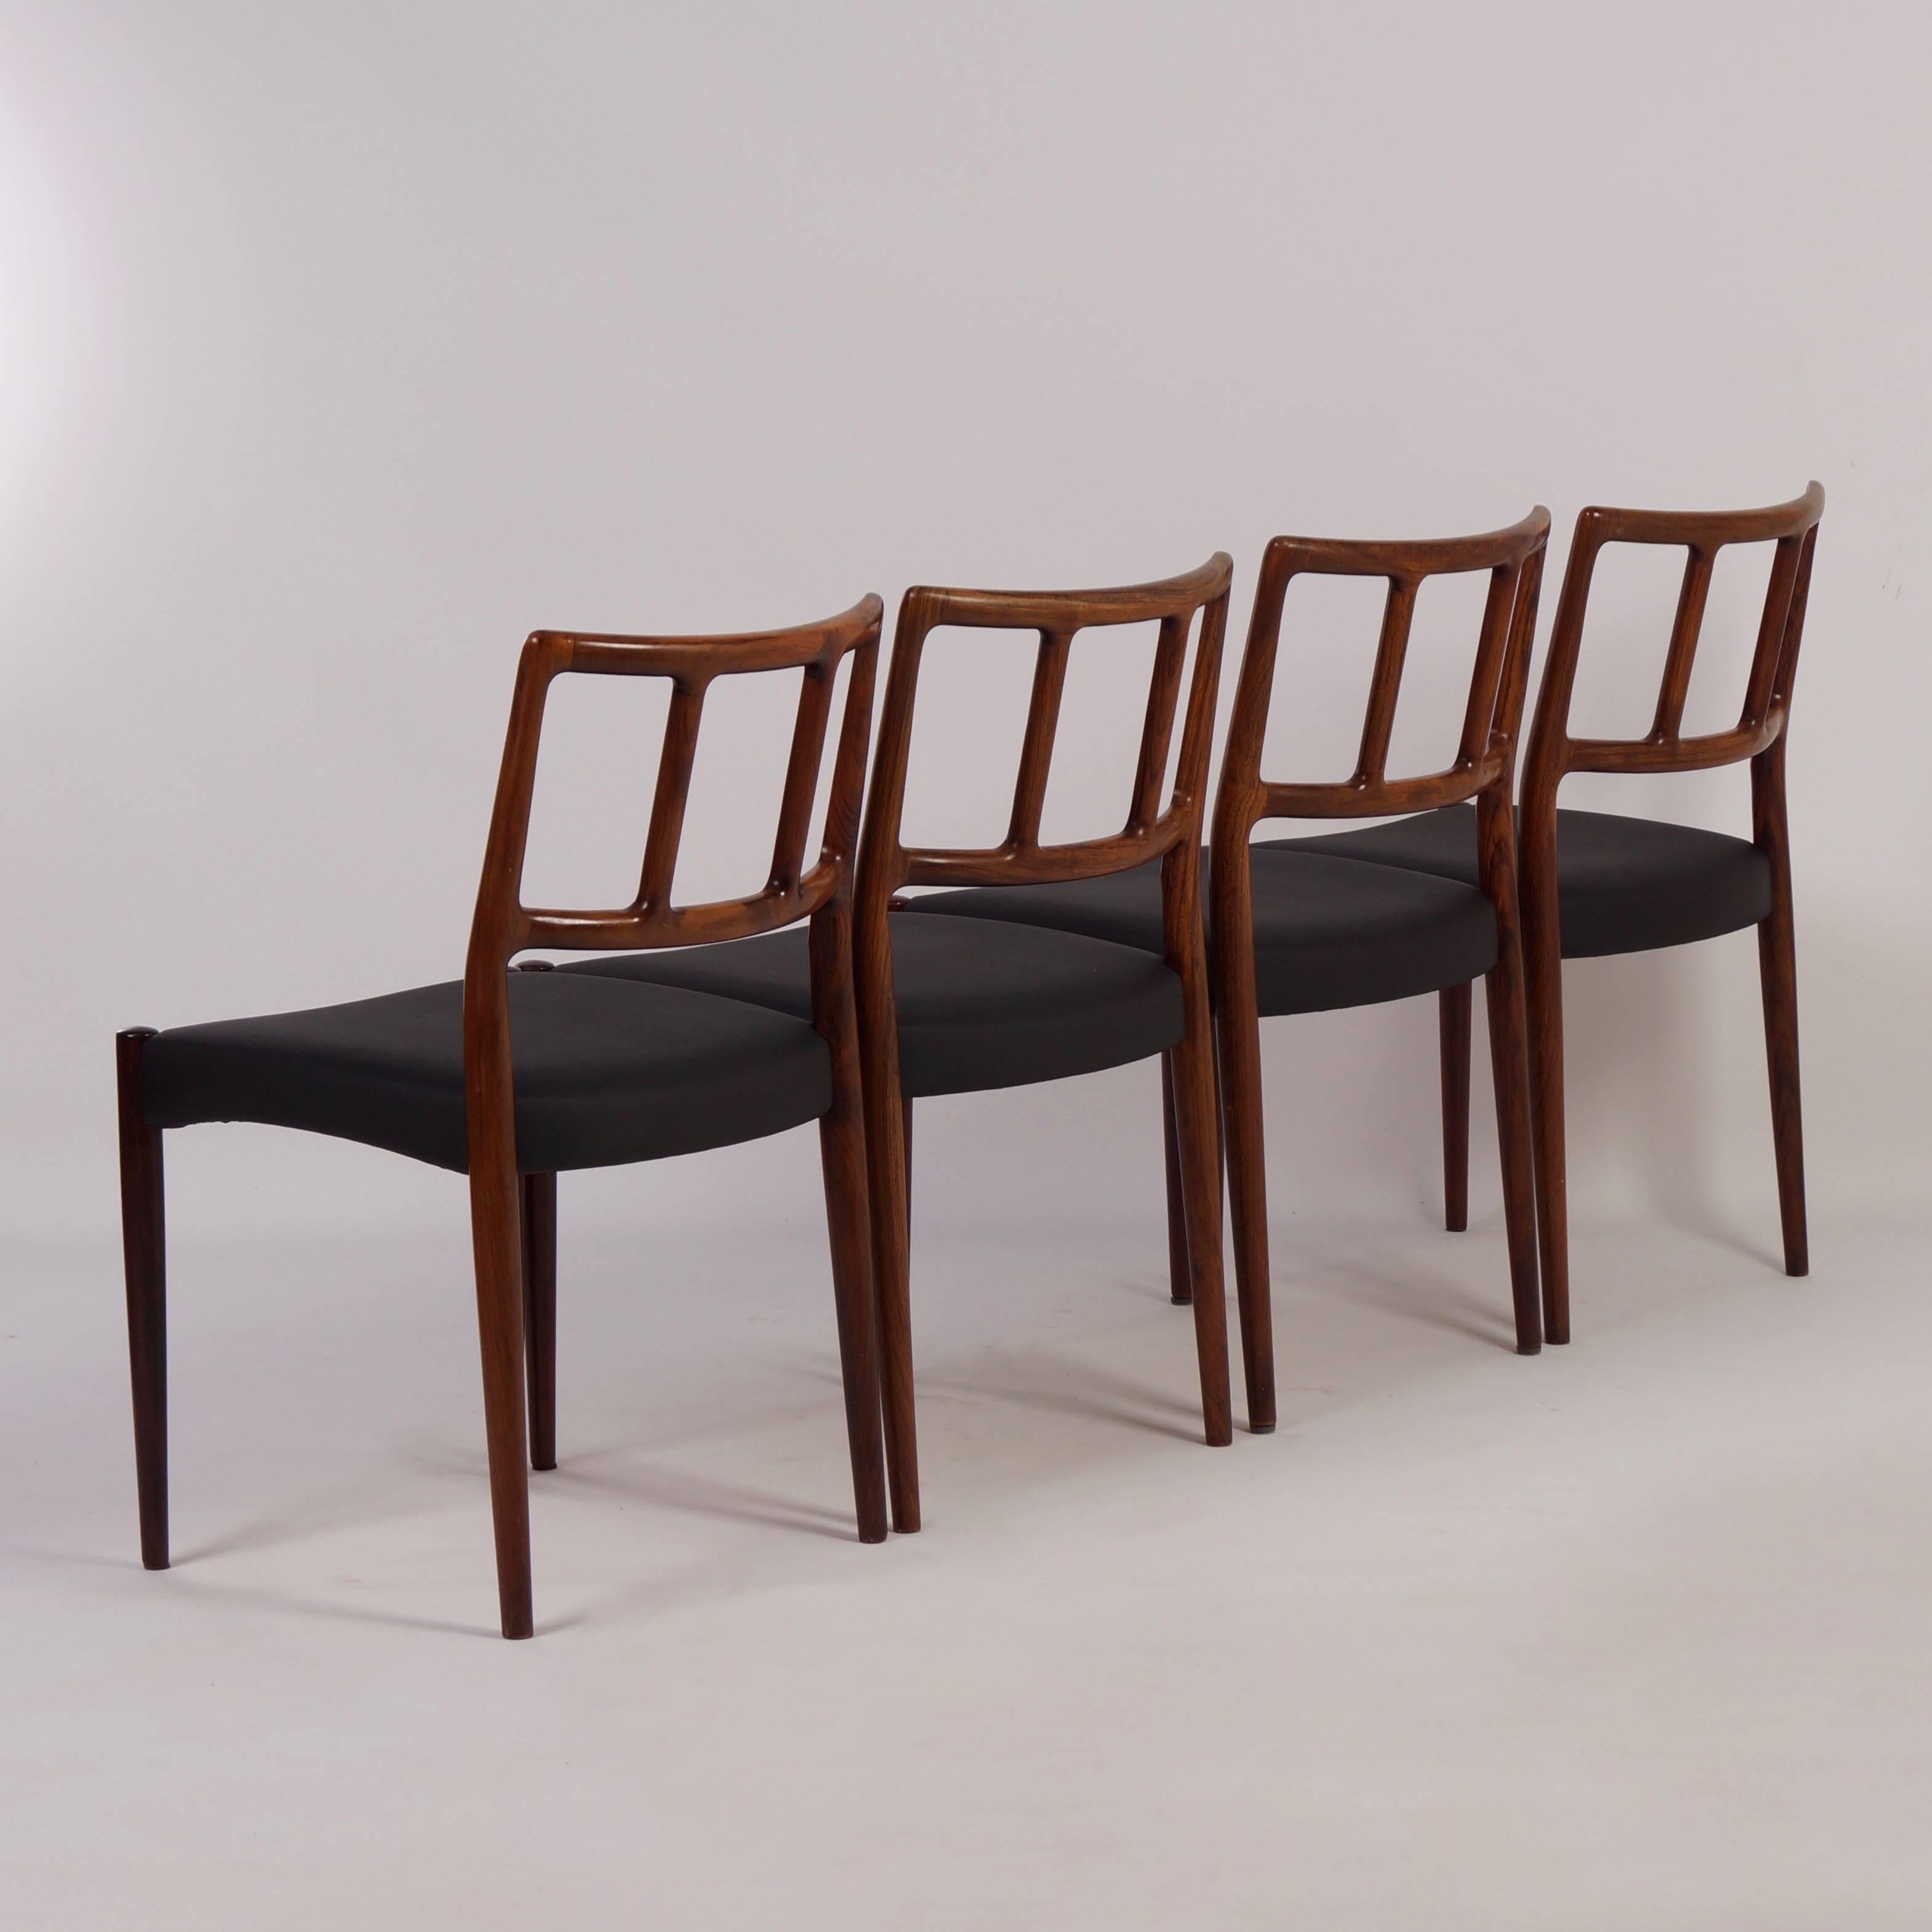 Mid-20th Century Set of Dining Chairs by Johannes Andersen for Uldum Møbelfabrik, 1960s For Sale